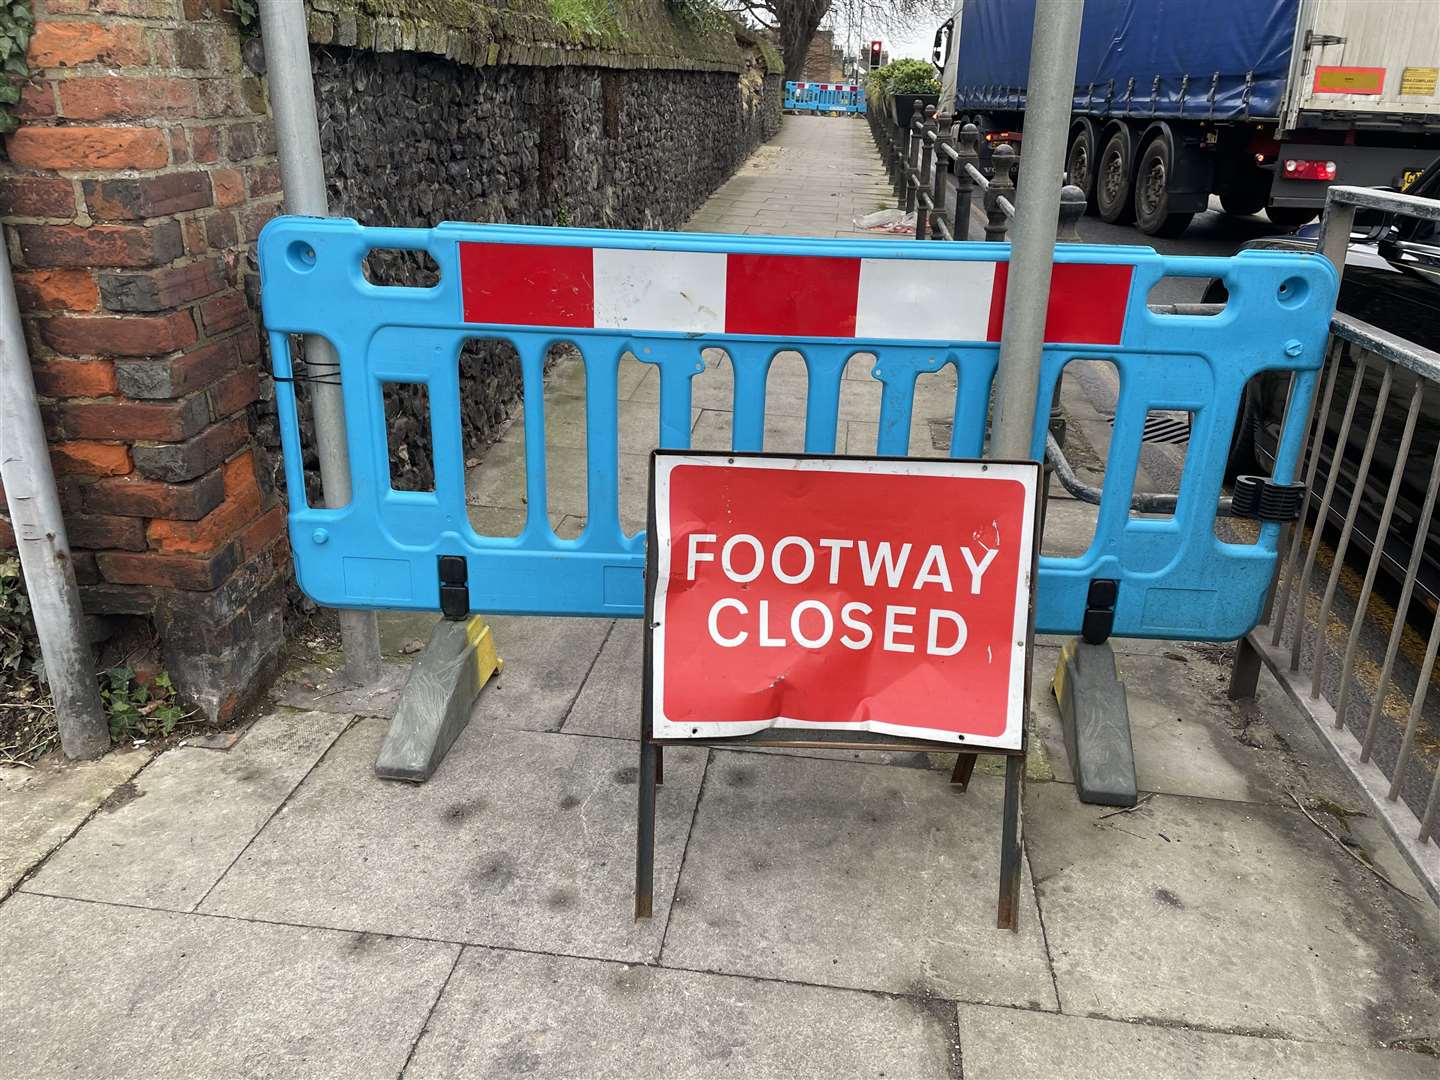 The unsafe pathway is closed to pedestrians